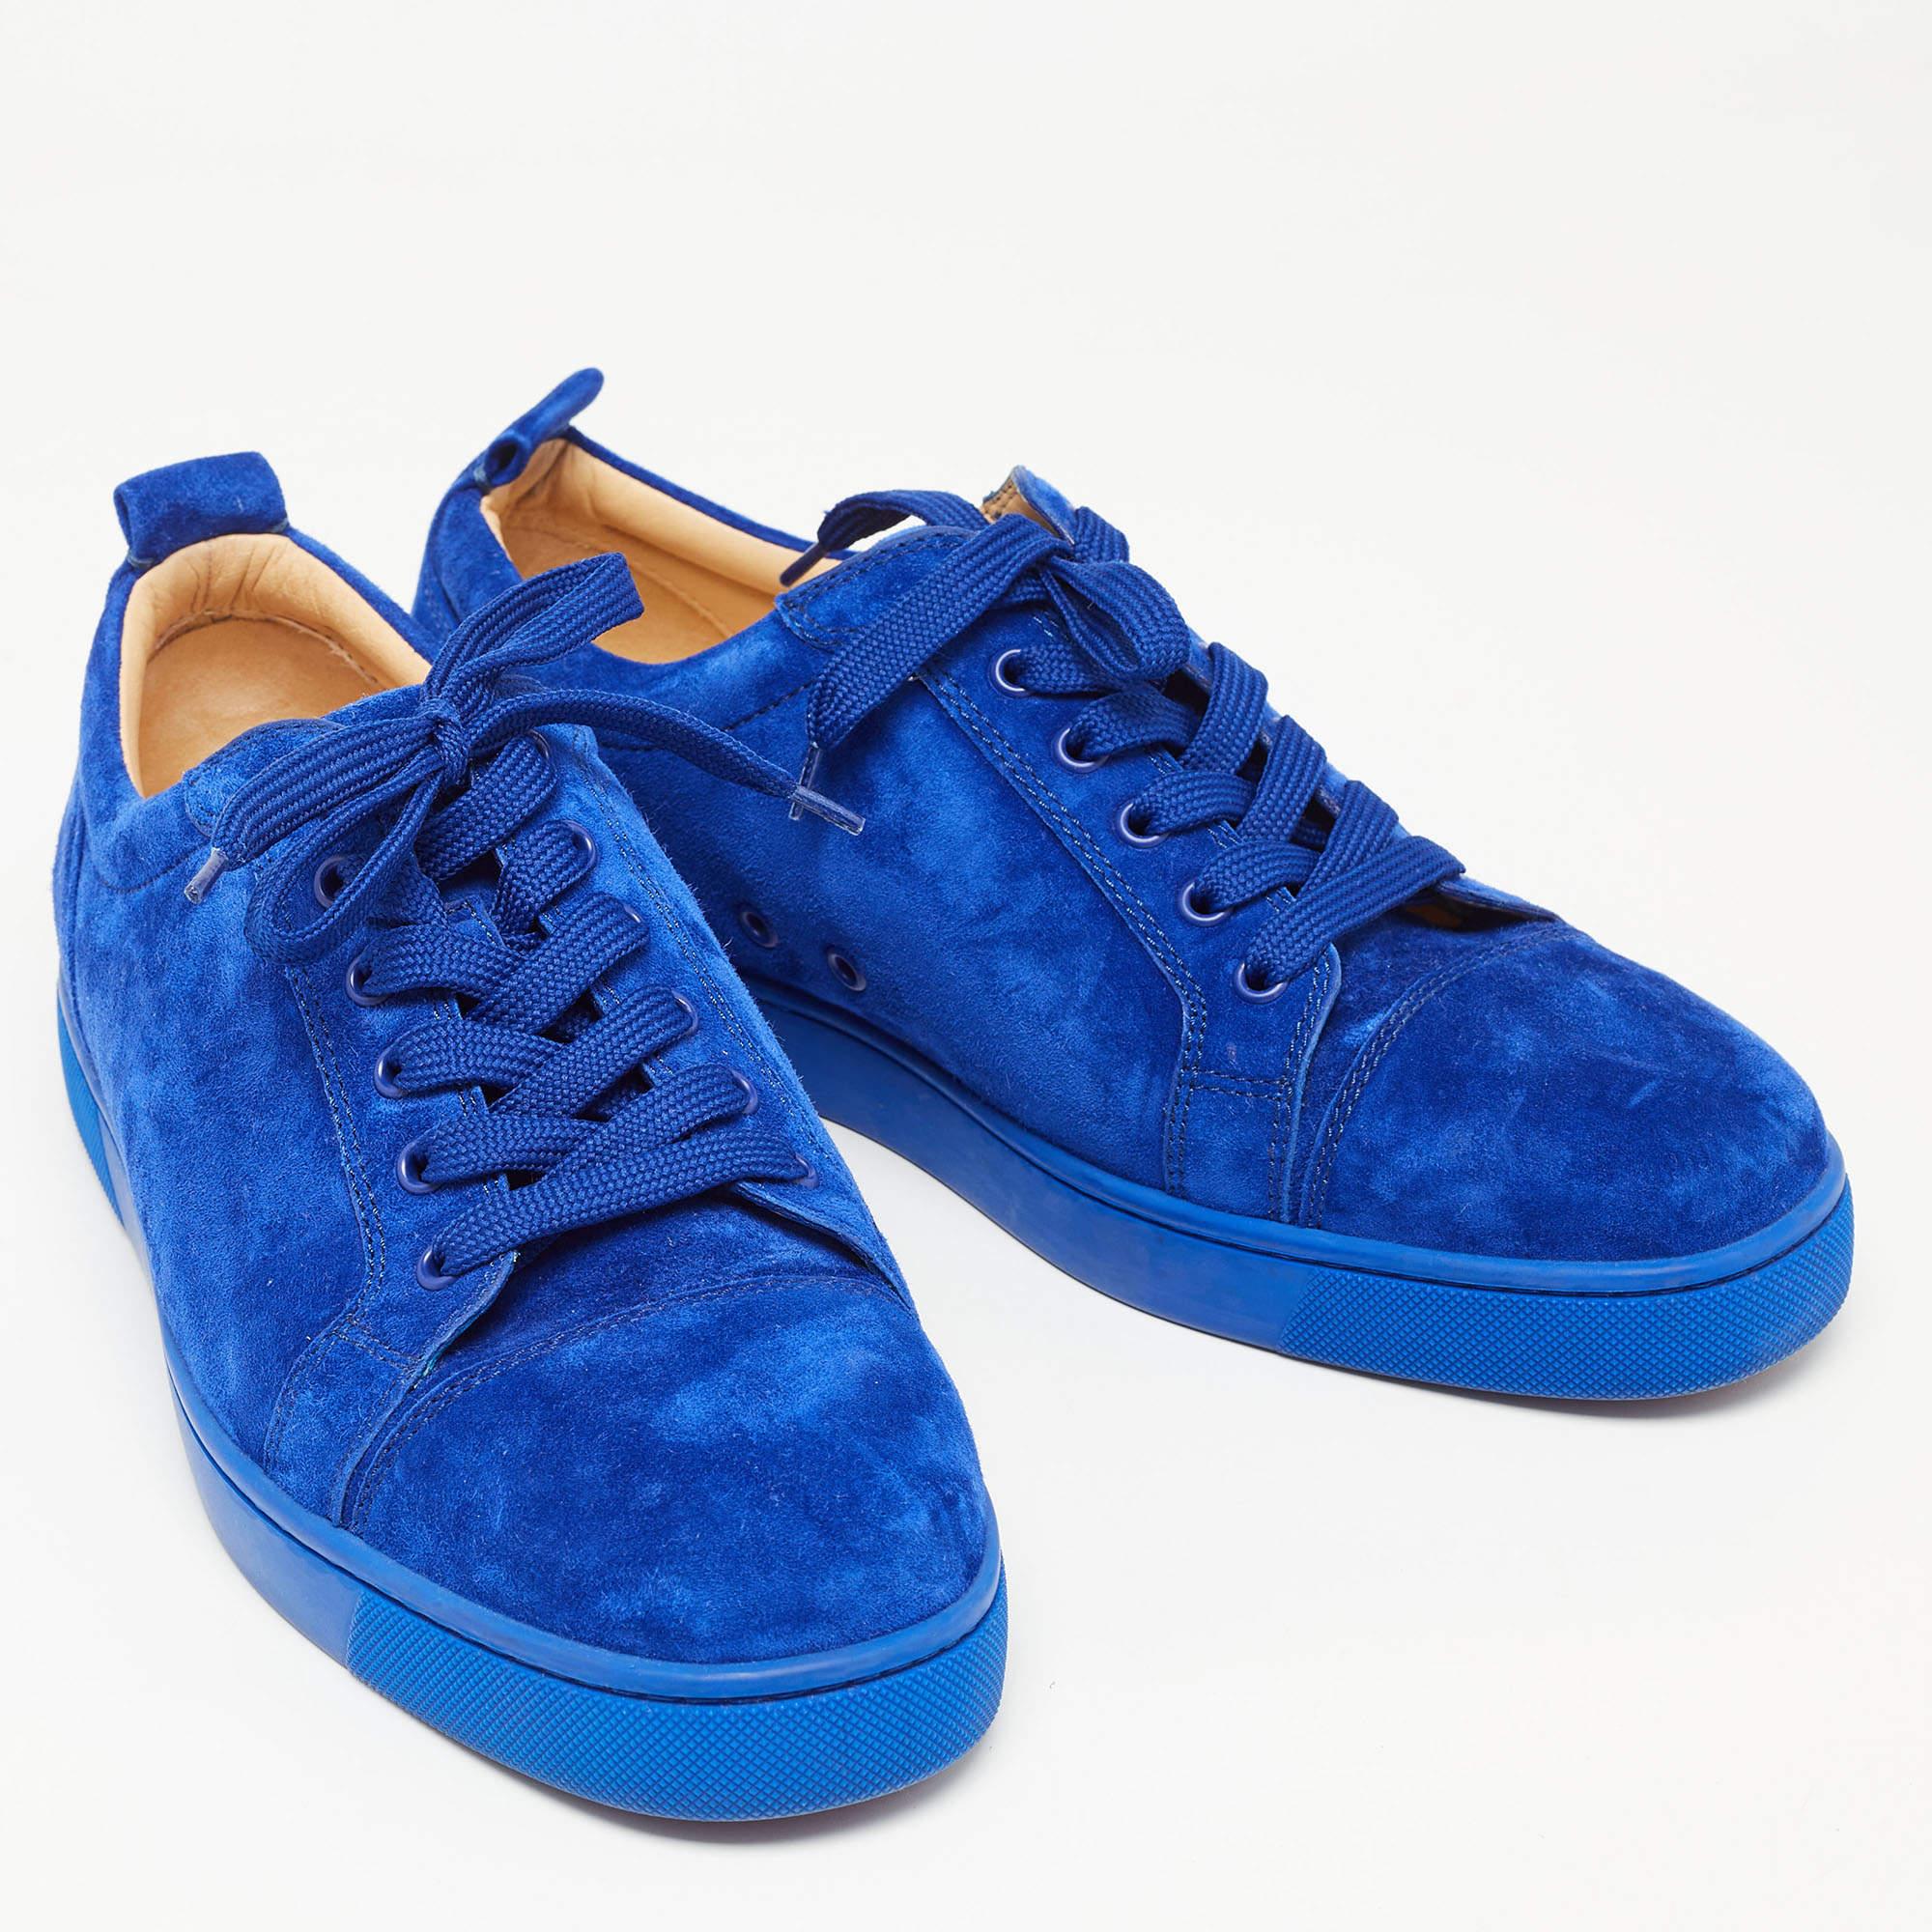 Women's Christian Louboutin Blue Suede Leather Low Top Sneakers Size 42.5